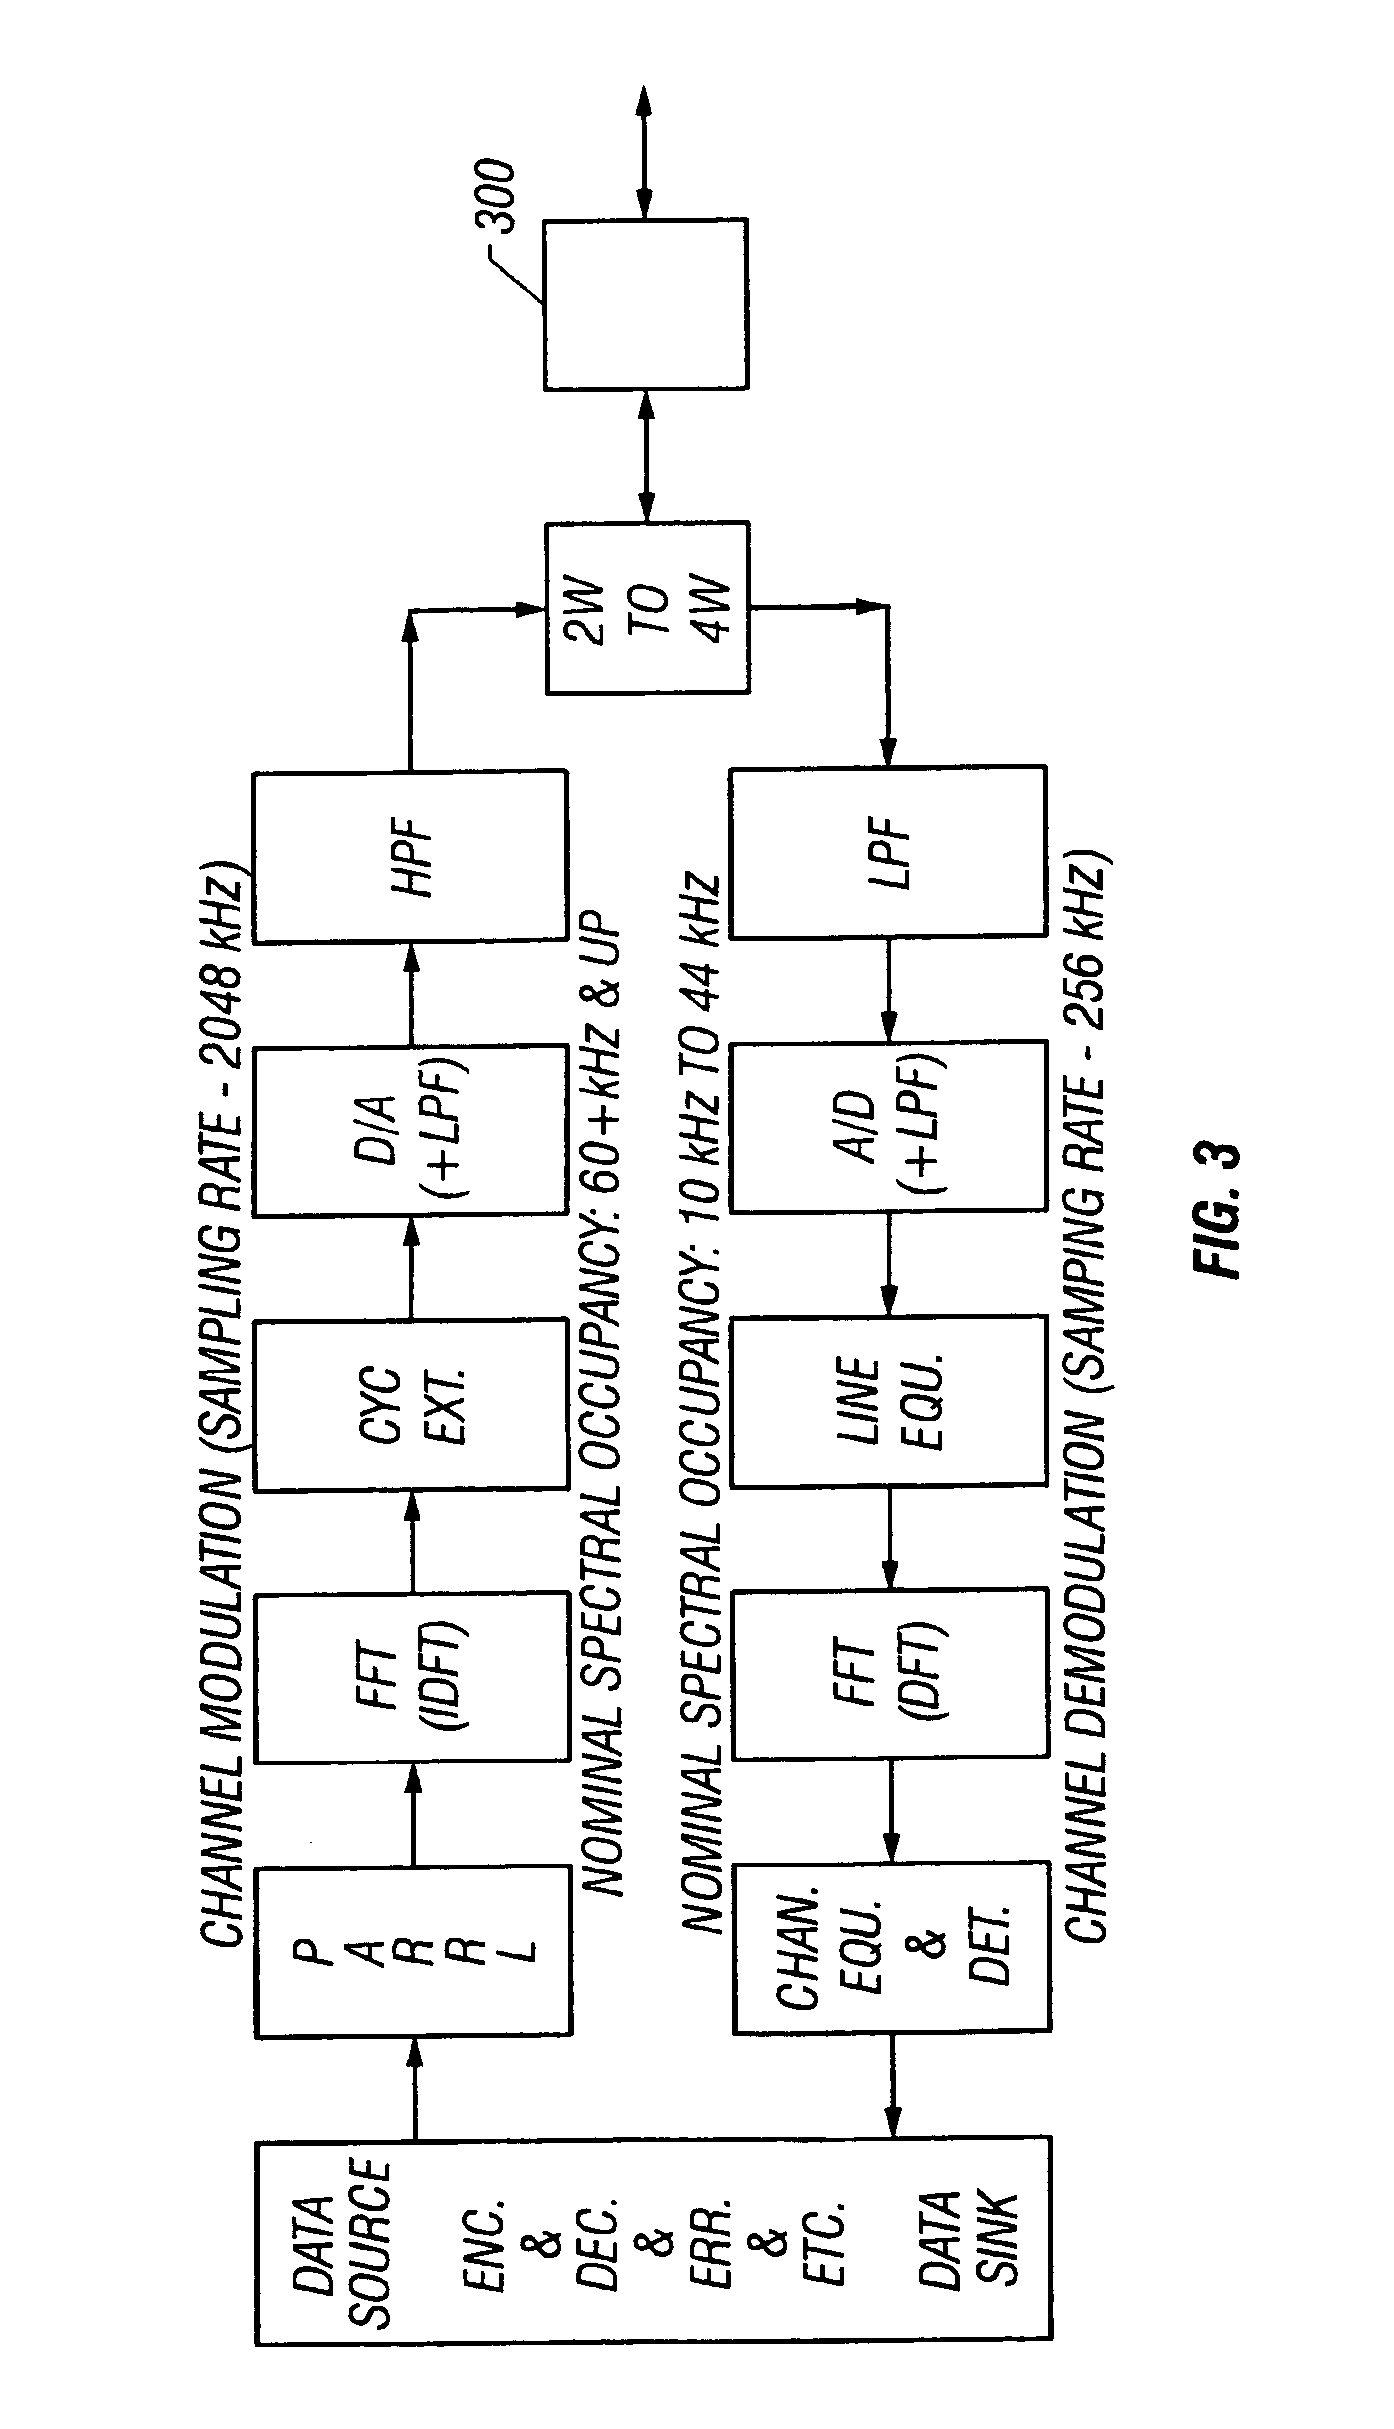 Long subscriber loops using automatic gain control mid-span extender unit